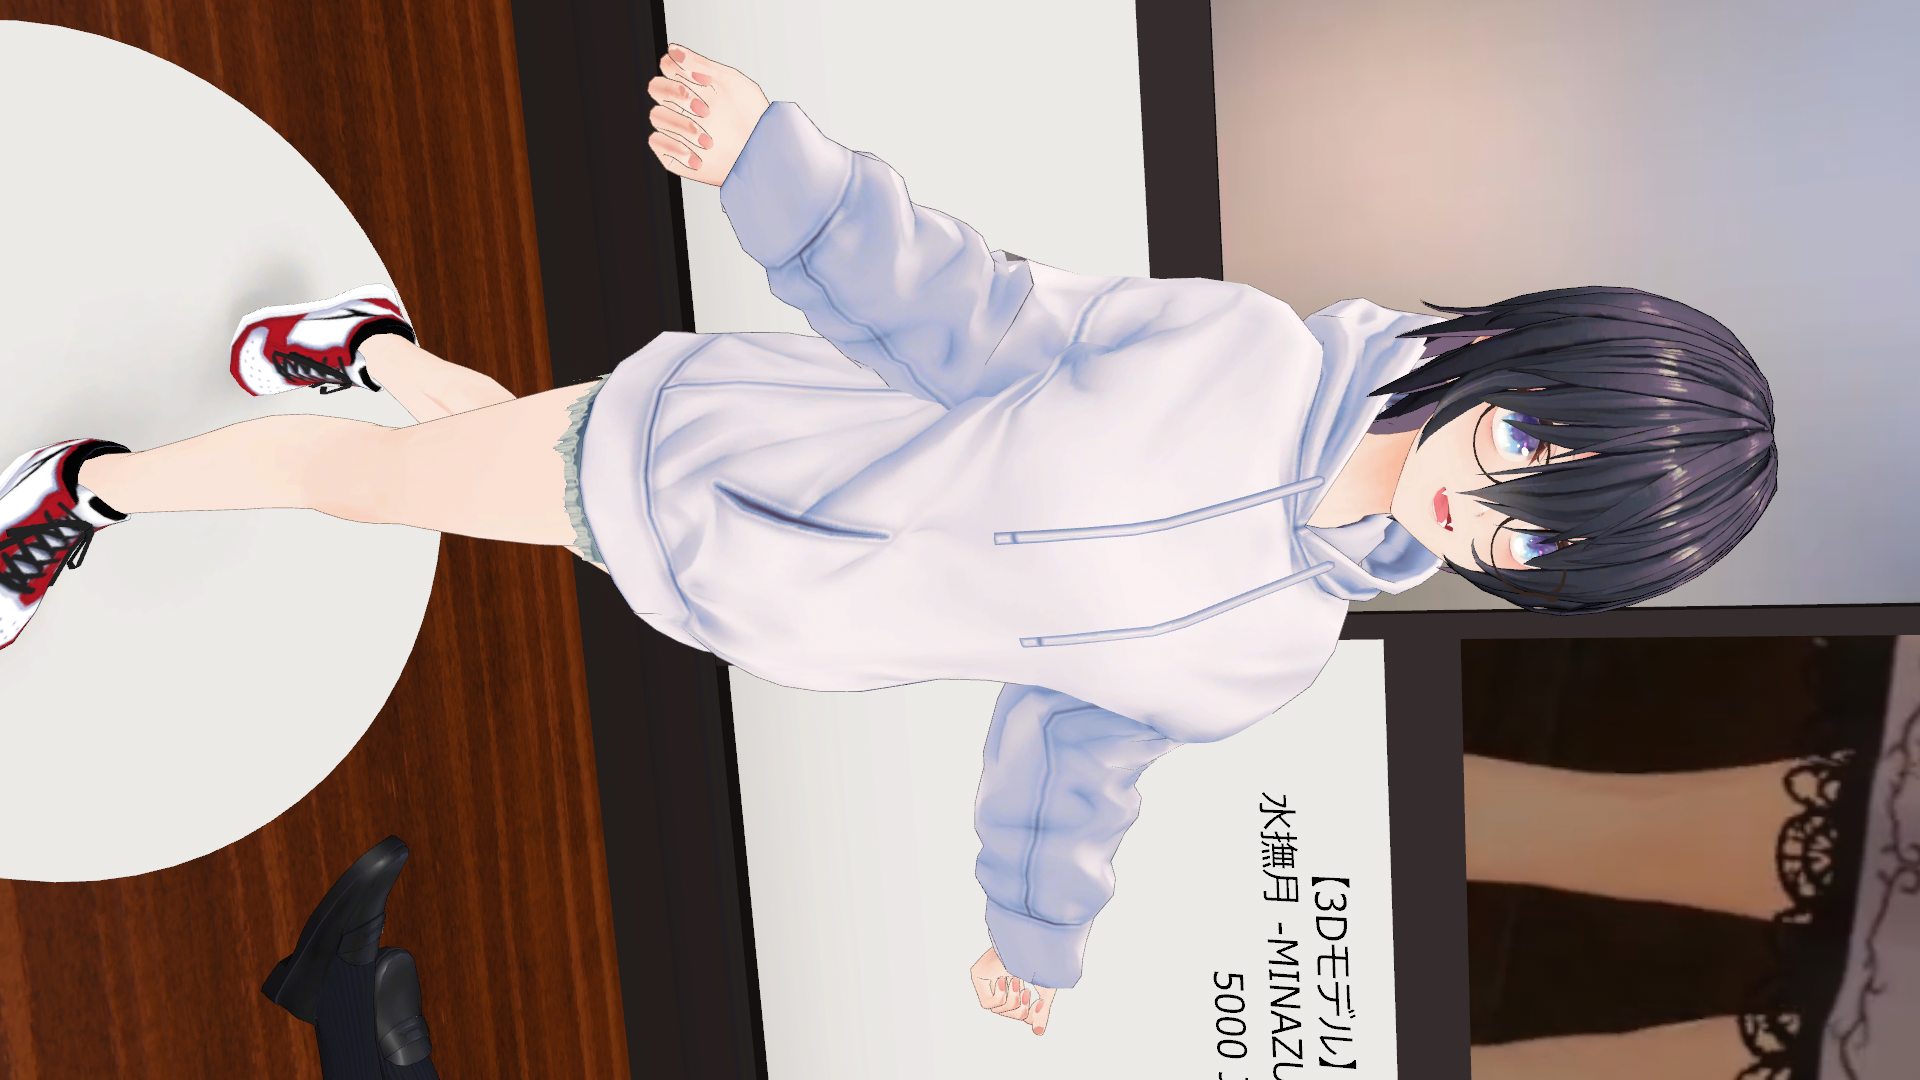 VRChat_1920x1080_2021-12-05_02-32-21.565.png